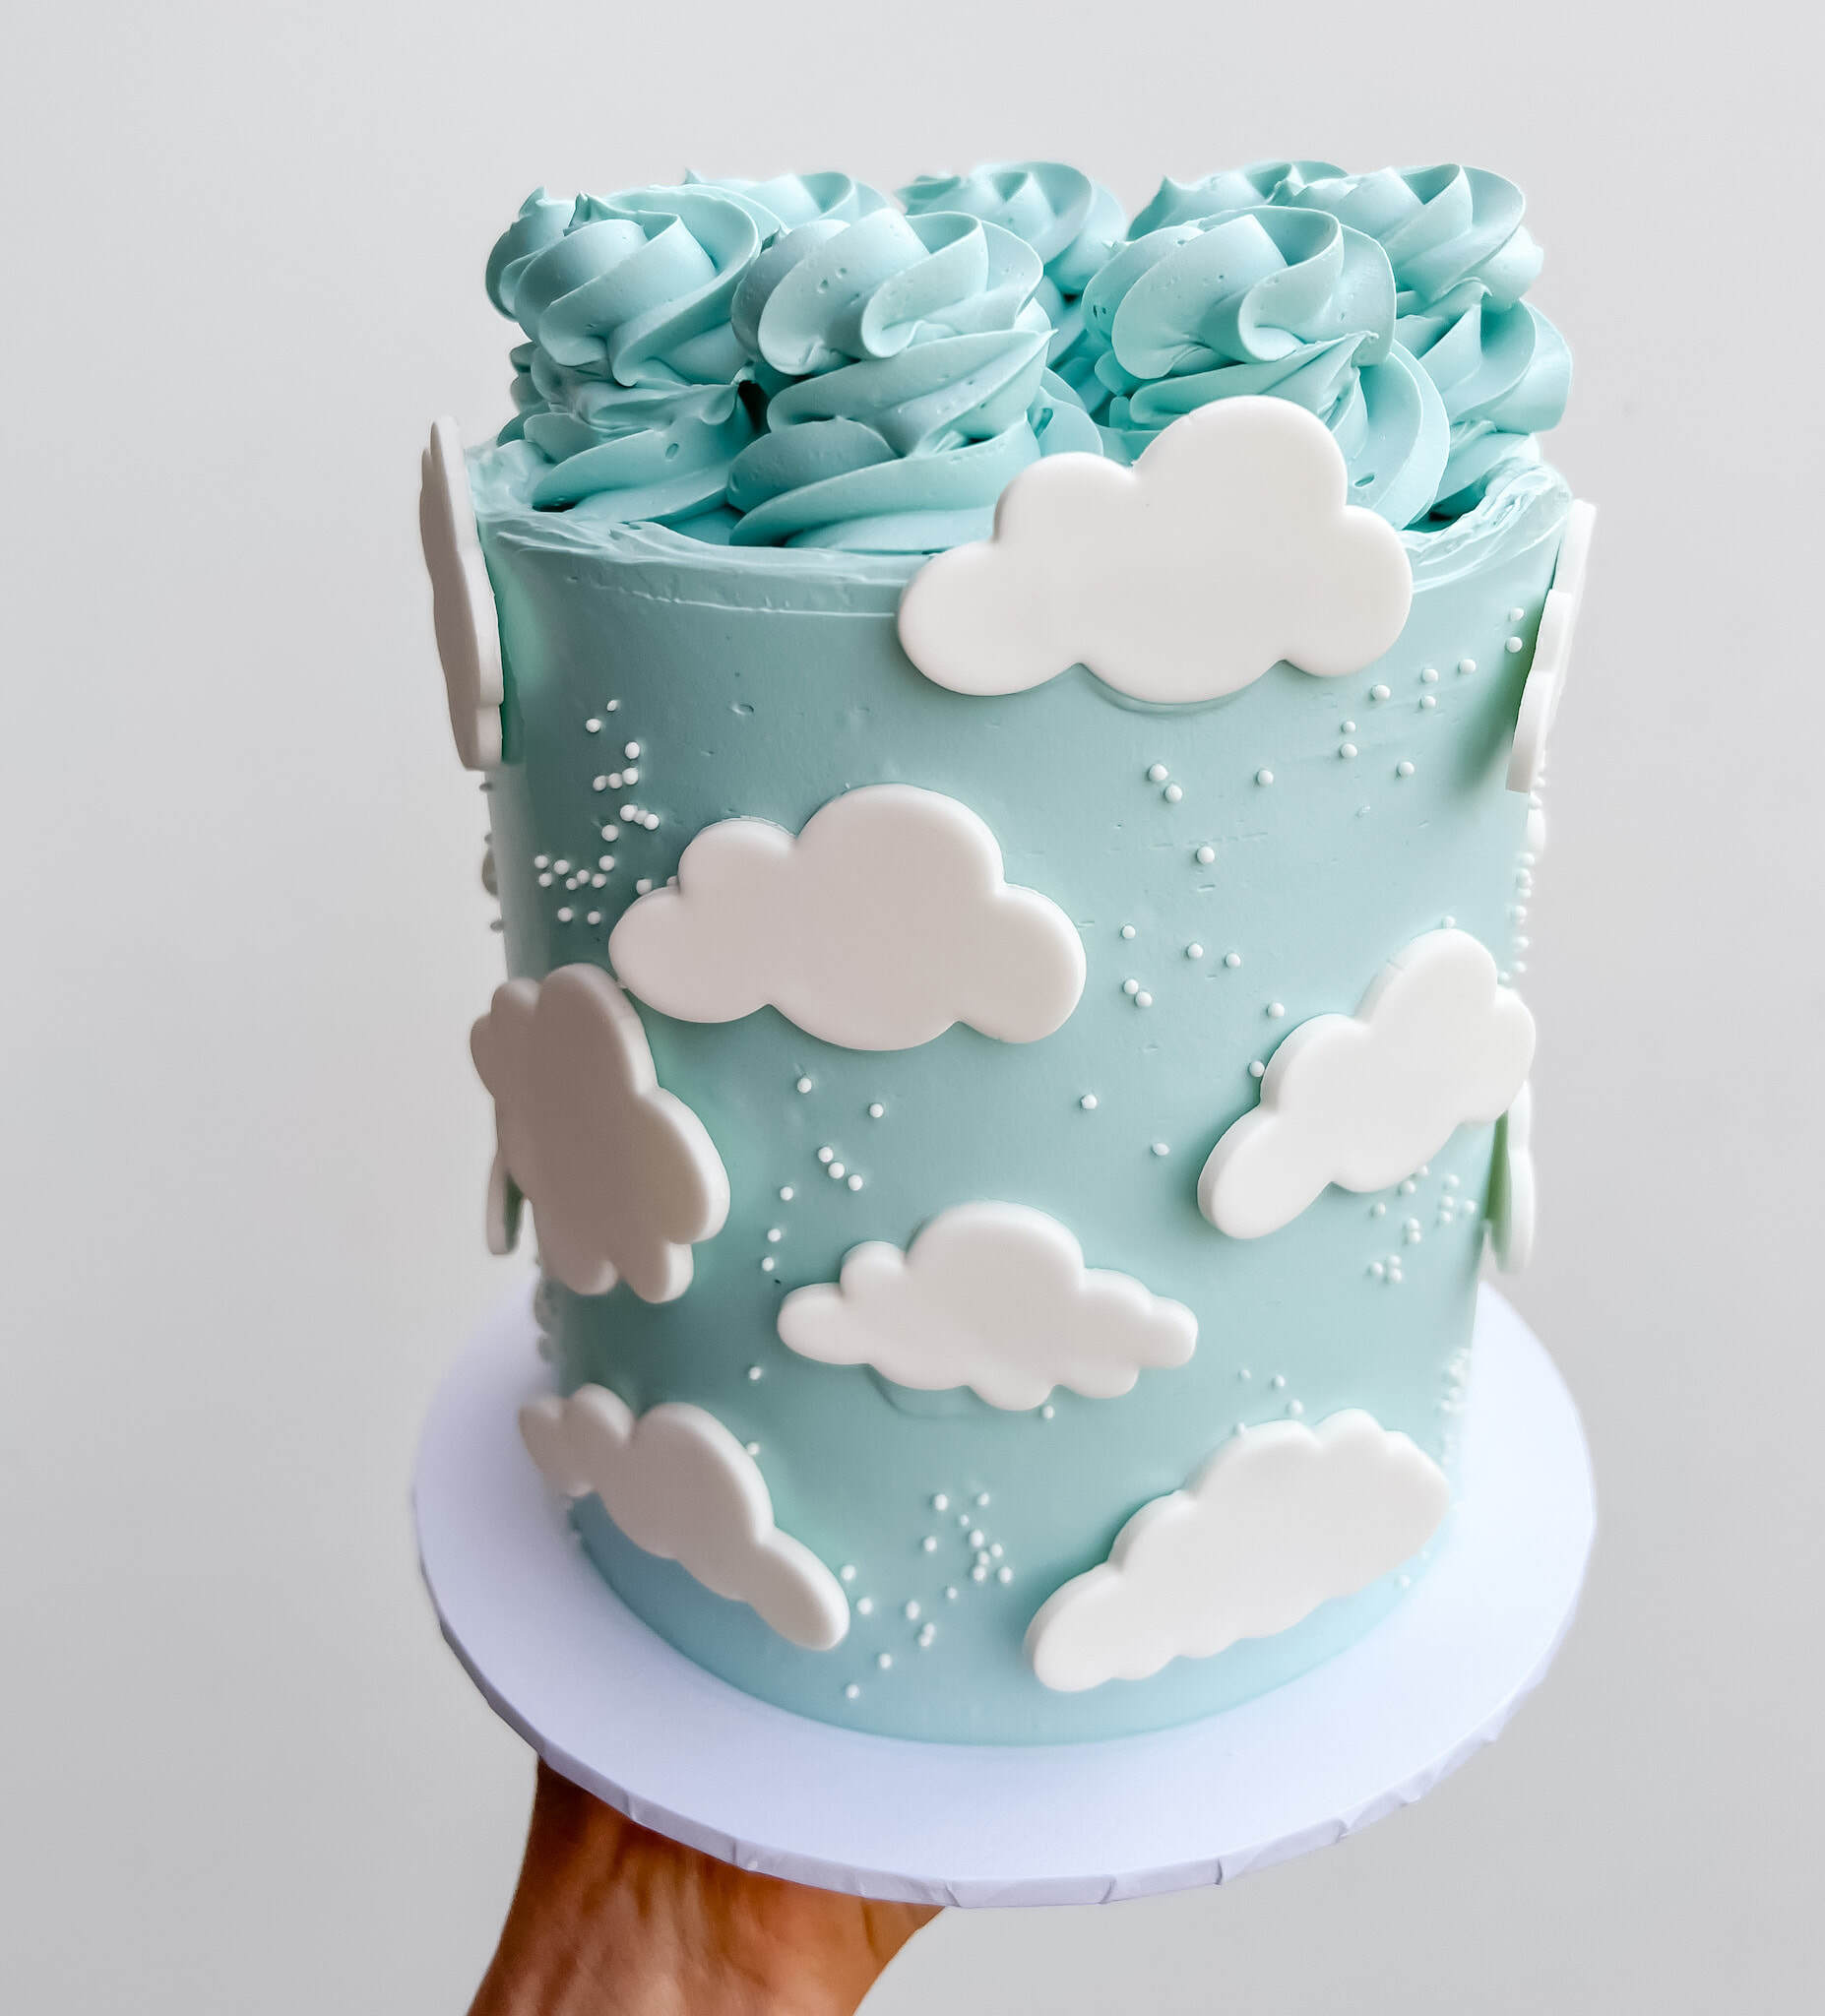 Chocolate Cloud Cake Is the Most Delicious Cake I've Ever Tried — And  That's Saying Something